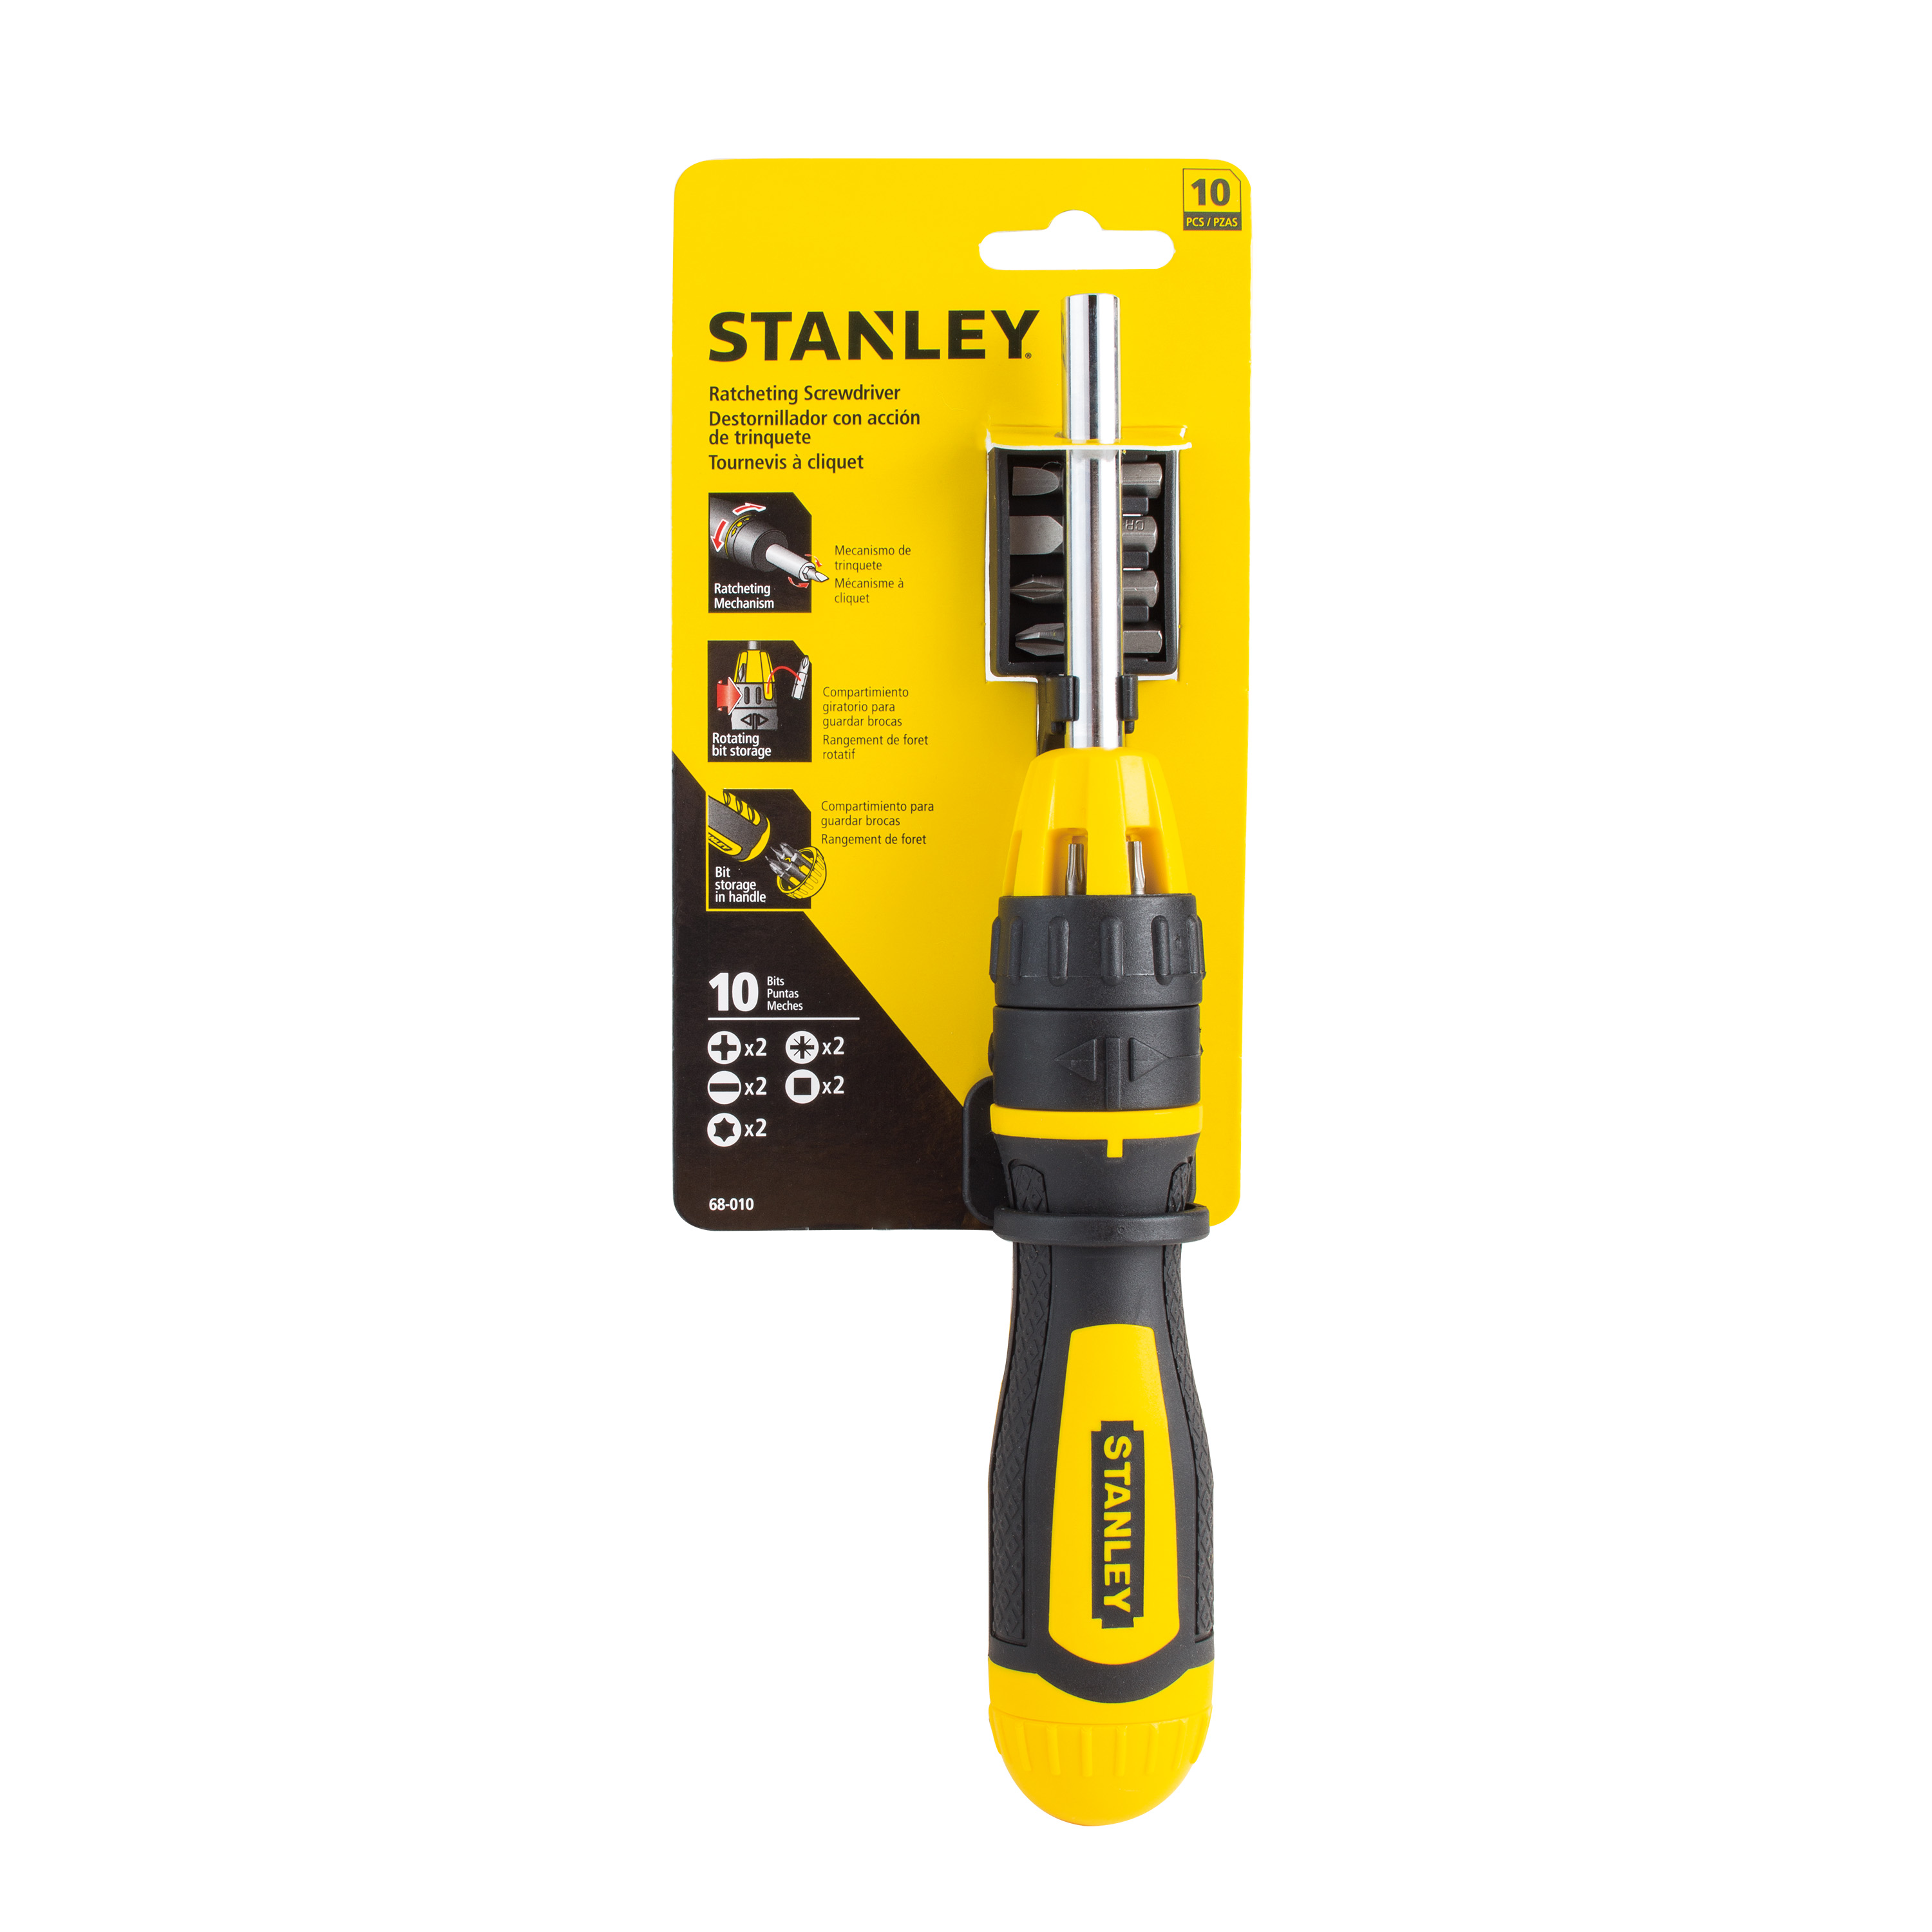 STANLEY® 68-010W - 10pc Ratcheting Screwdriver - image 1 of 3